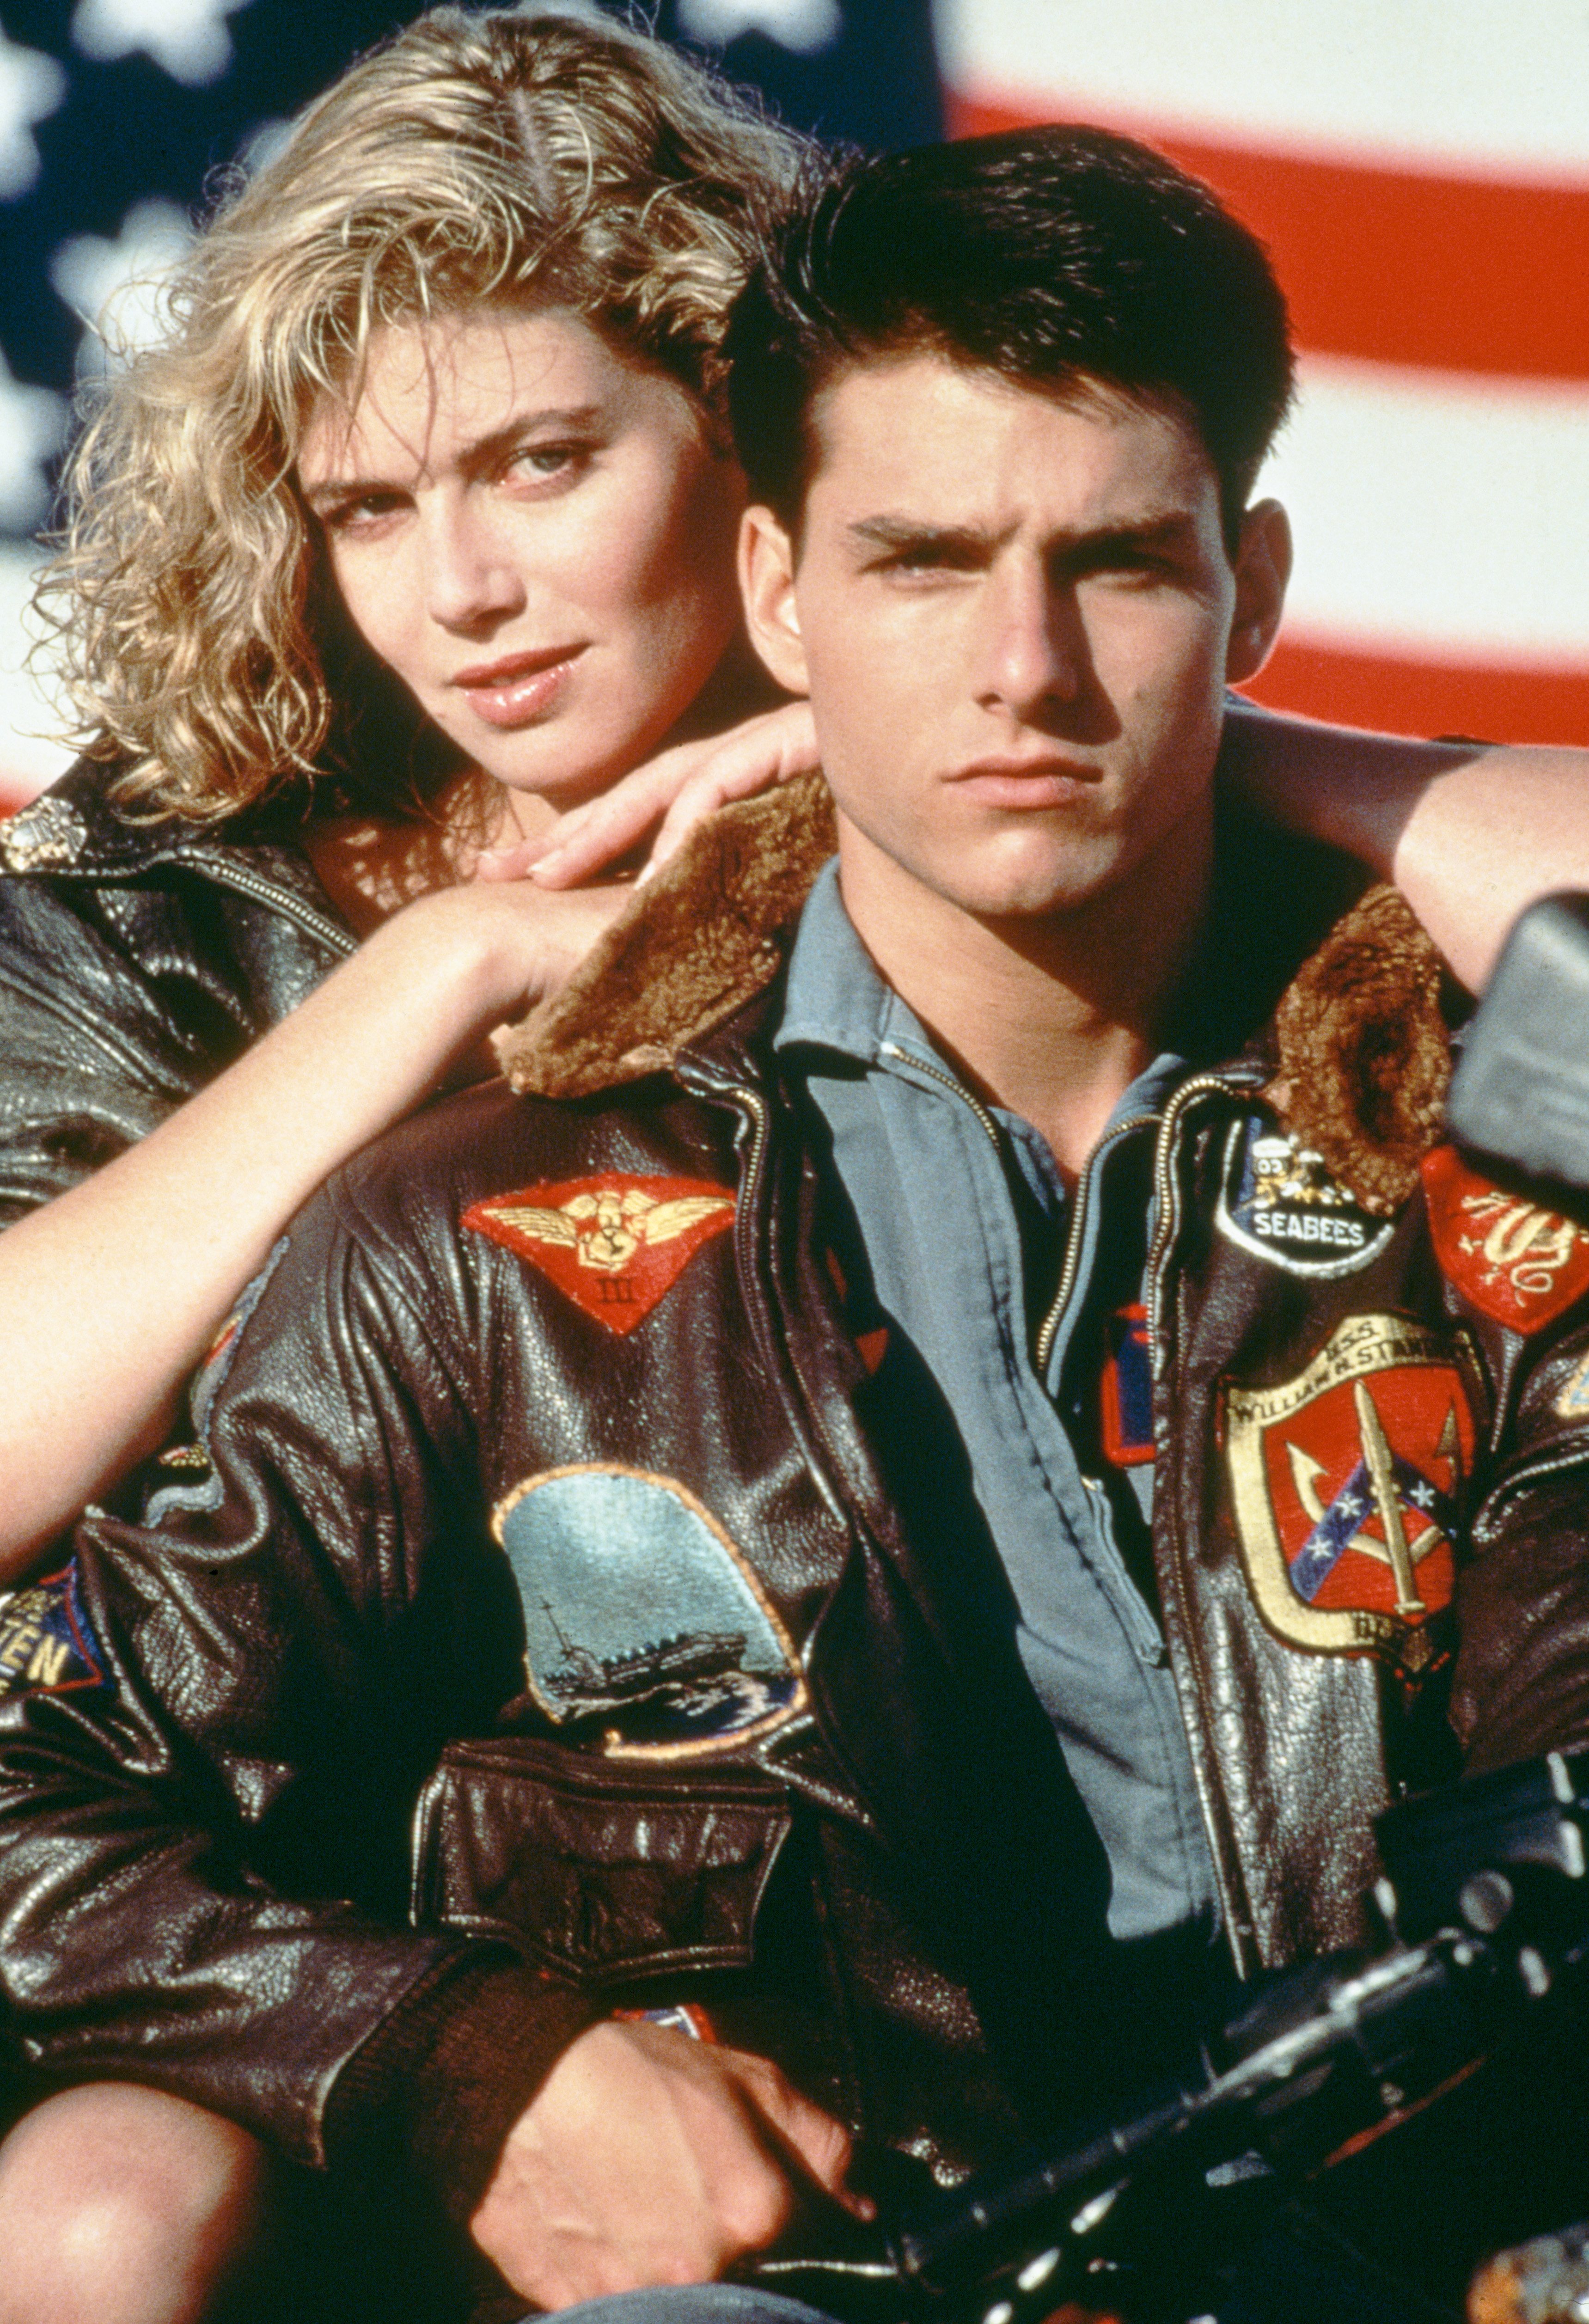 American actors Tom Cruise, as Lieutenant Pete 'Maverick' Mitchell, and Kelly McGillis, as Charlotte 'Charlie' Blackwood, in a promotional portrait for "Top Gun," directed by Tony Scott, 1986. | Source: Getty Images